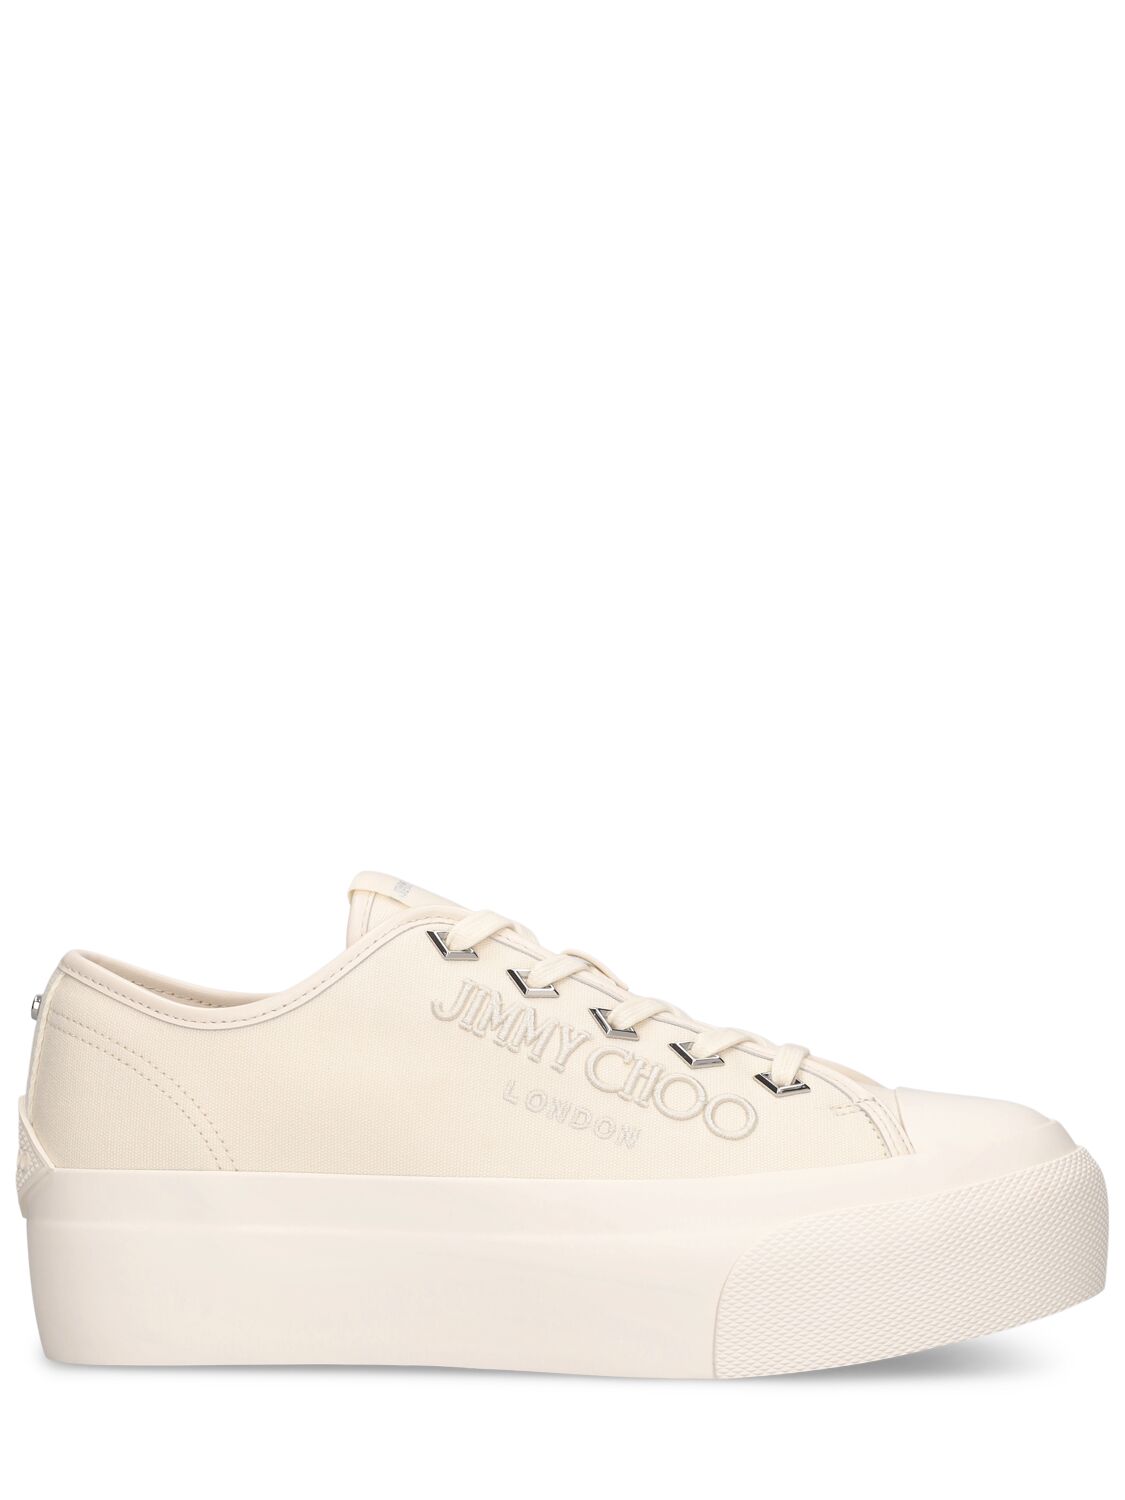 Jimmy Choo Palma Maxi Canvas & Leather Trainers In Off White